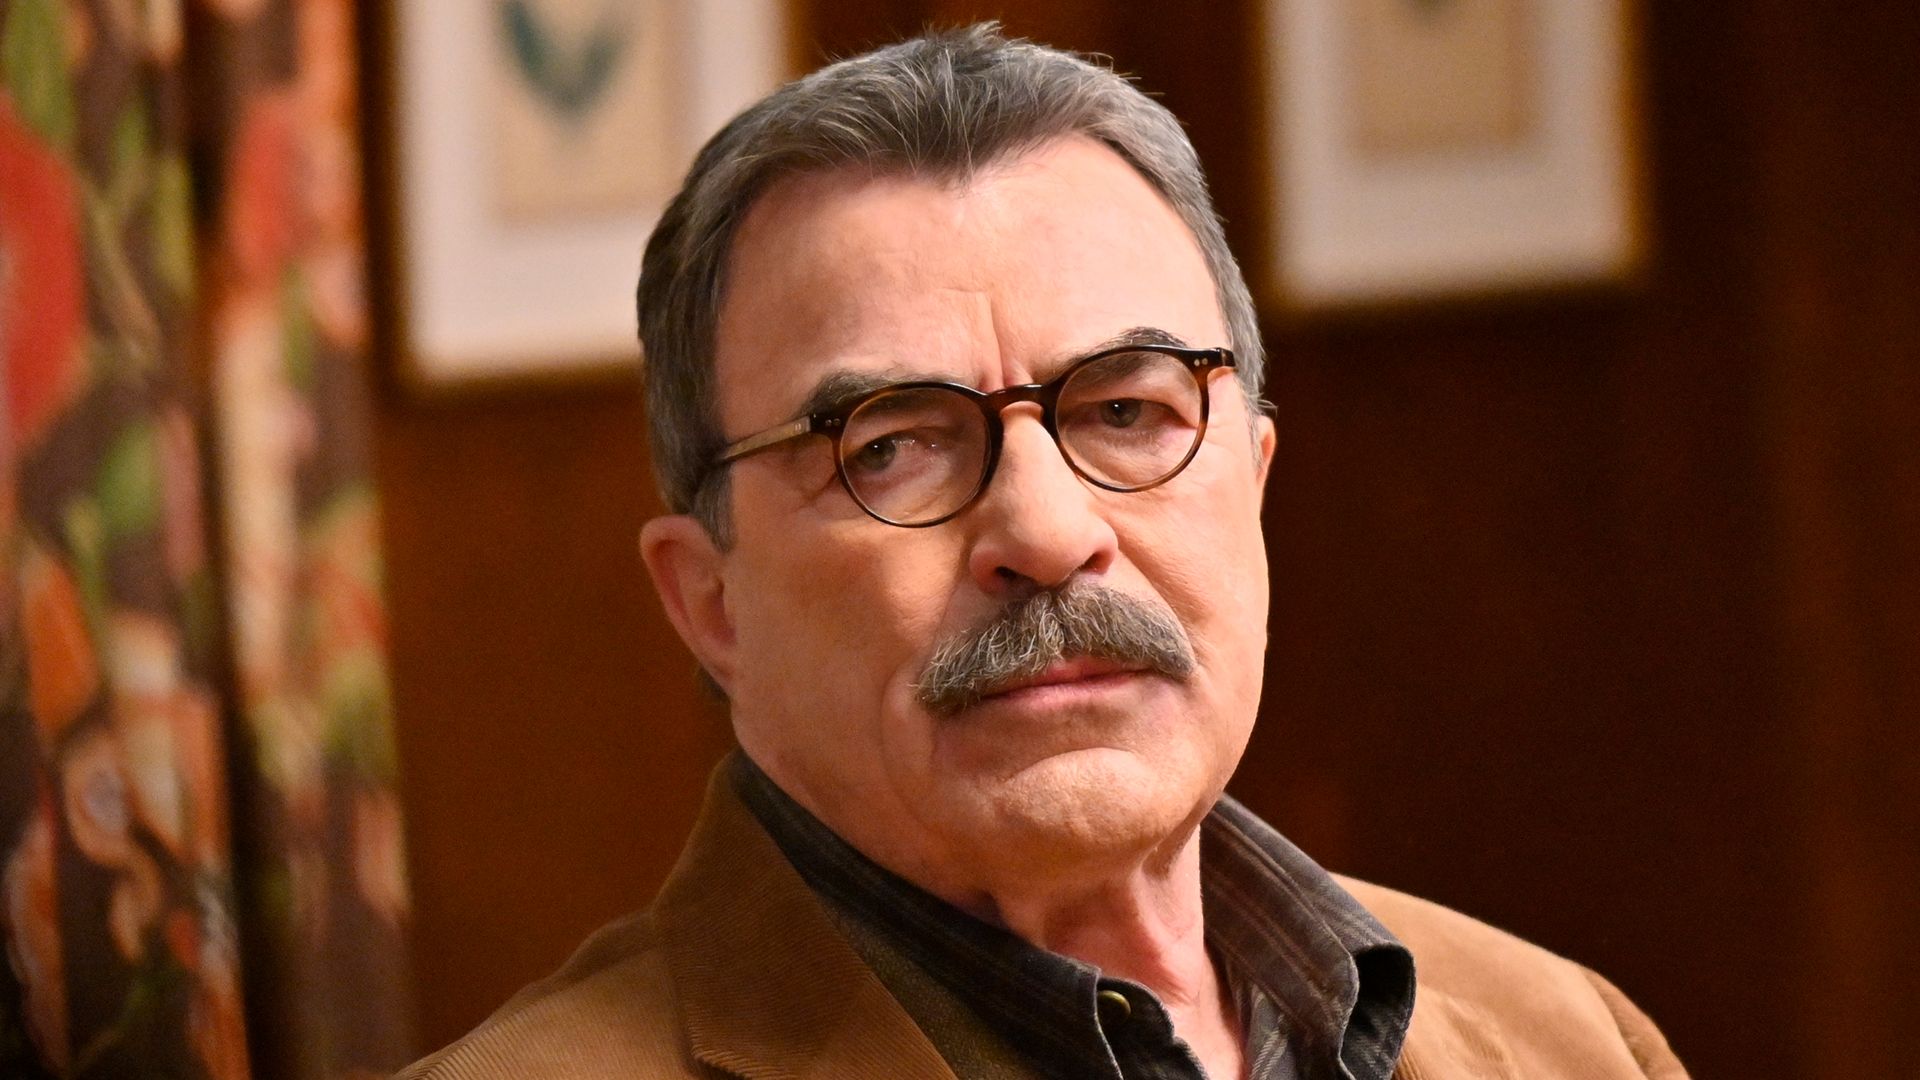 Tom Selleck hits back at CBS over Blue Bloods cancellation: 'All the cast wants to come back'